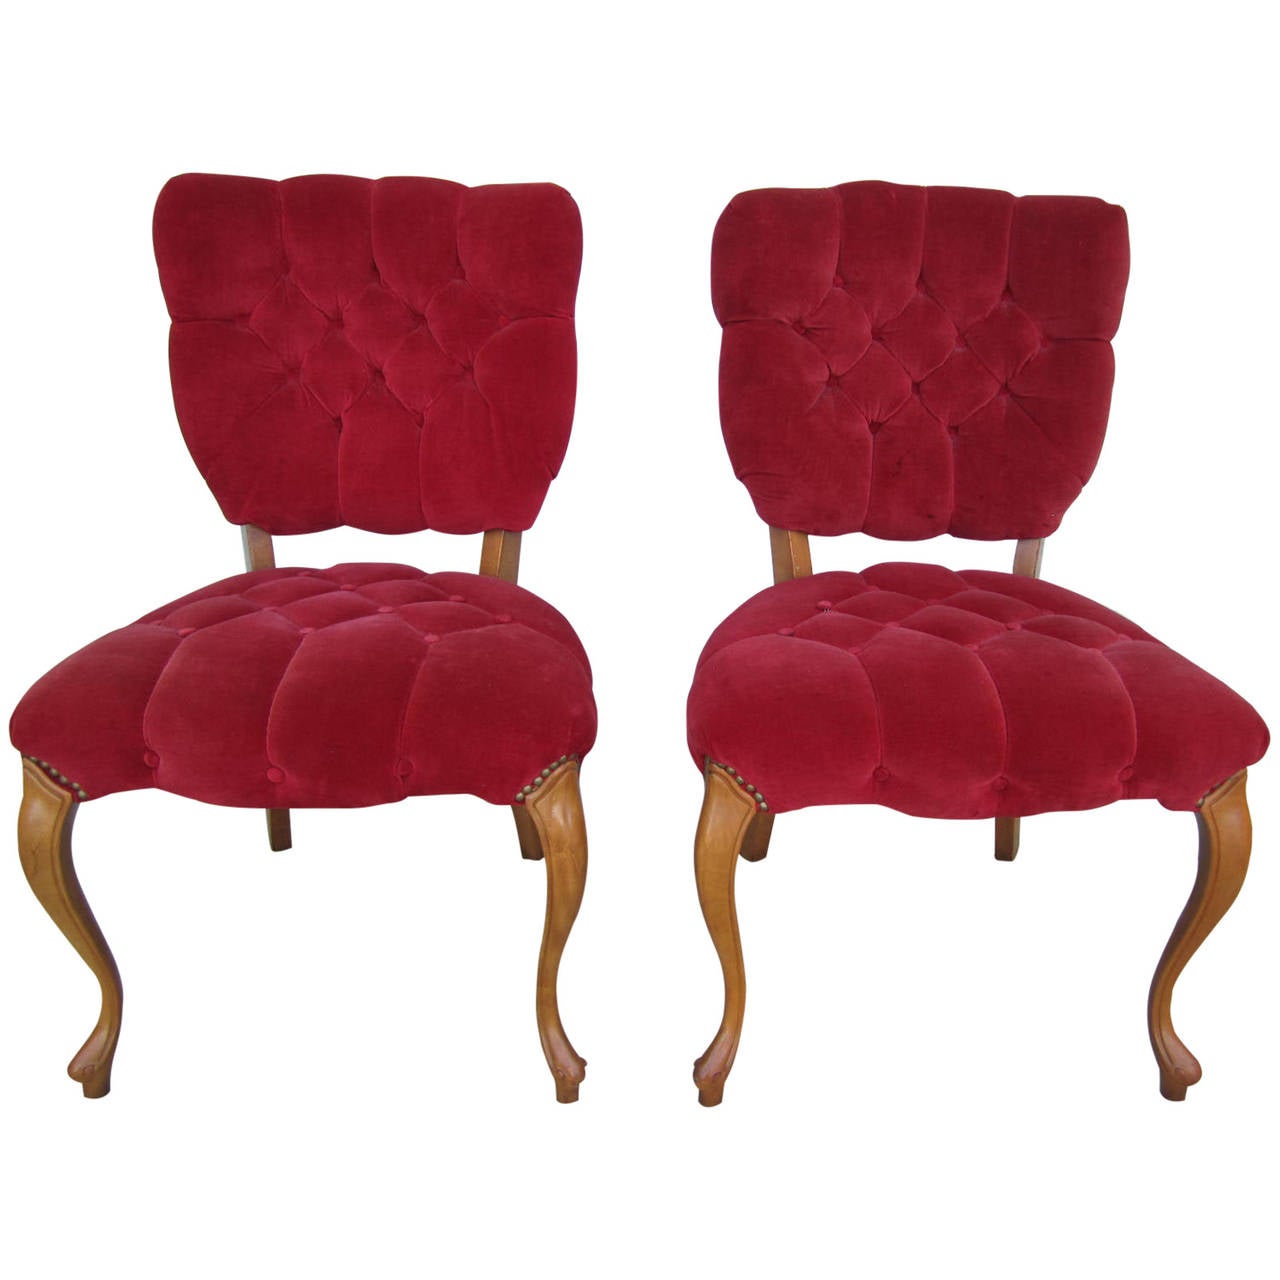 Pretty Pair of Queen Anne Style Red Tufted Side Chairs Hollywood Regency